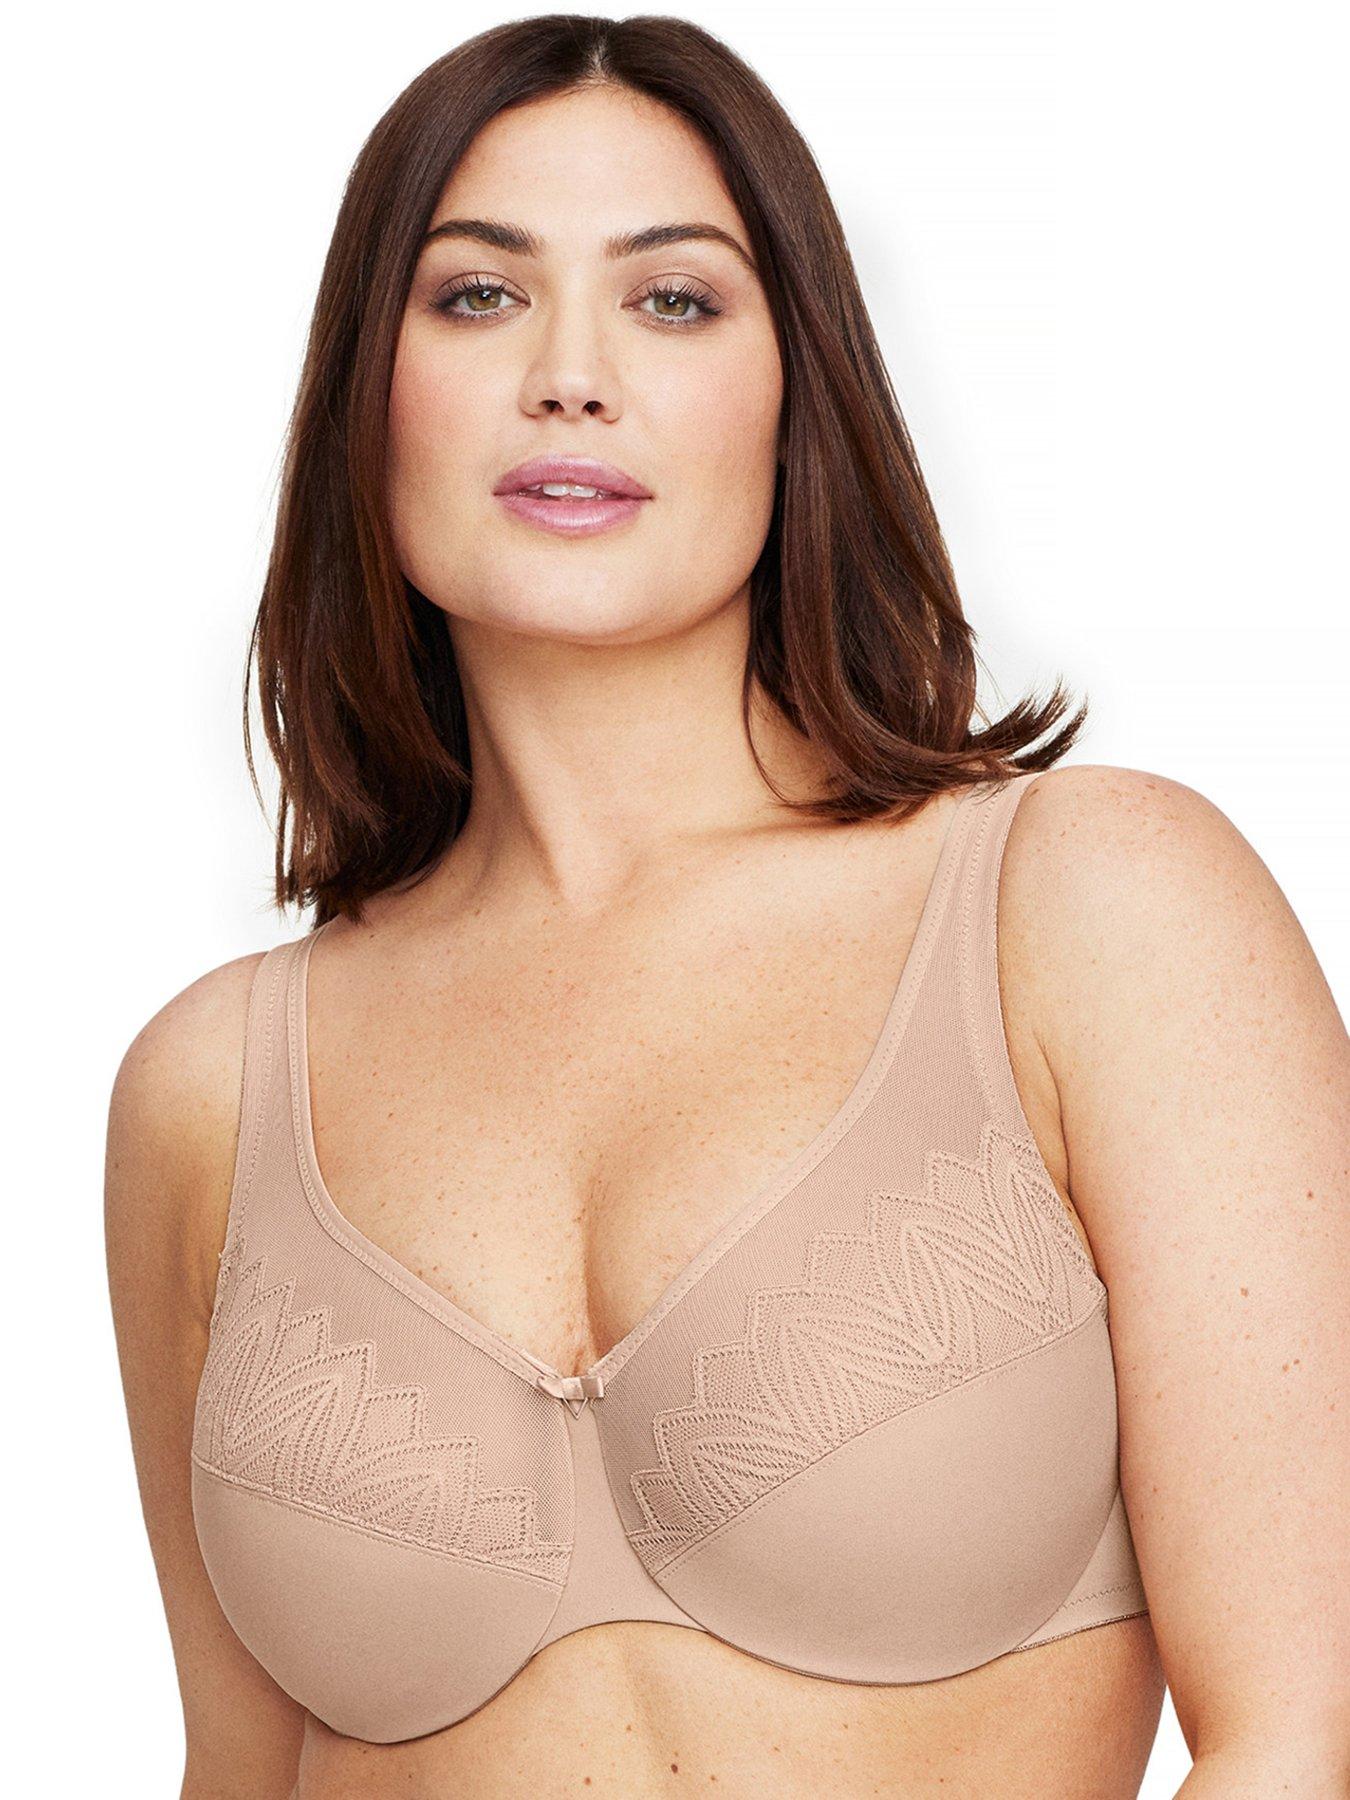 THE PERFECT BRA  TRY ON HAUL GLAMORISE BRAS! CUP SIZES FROM B-K